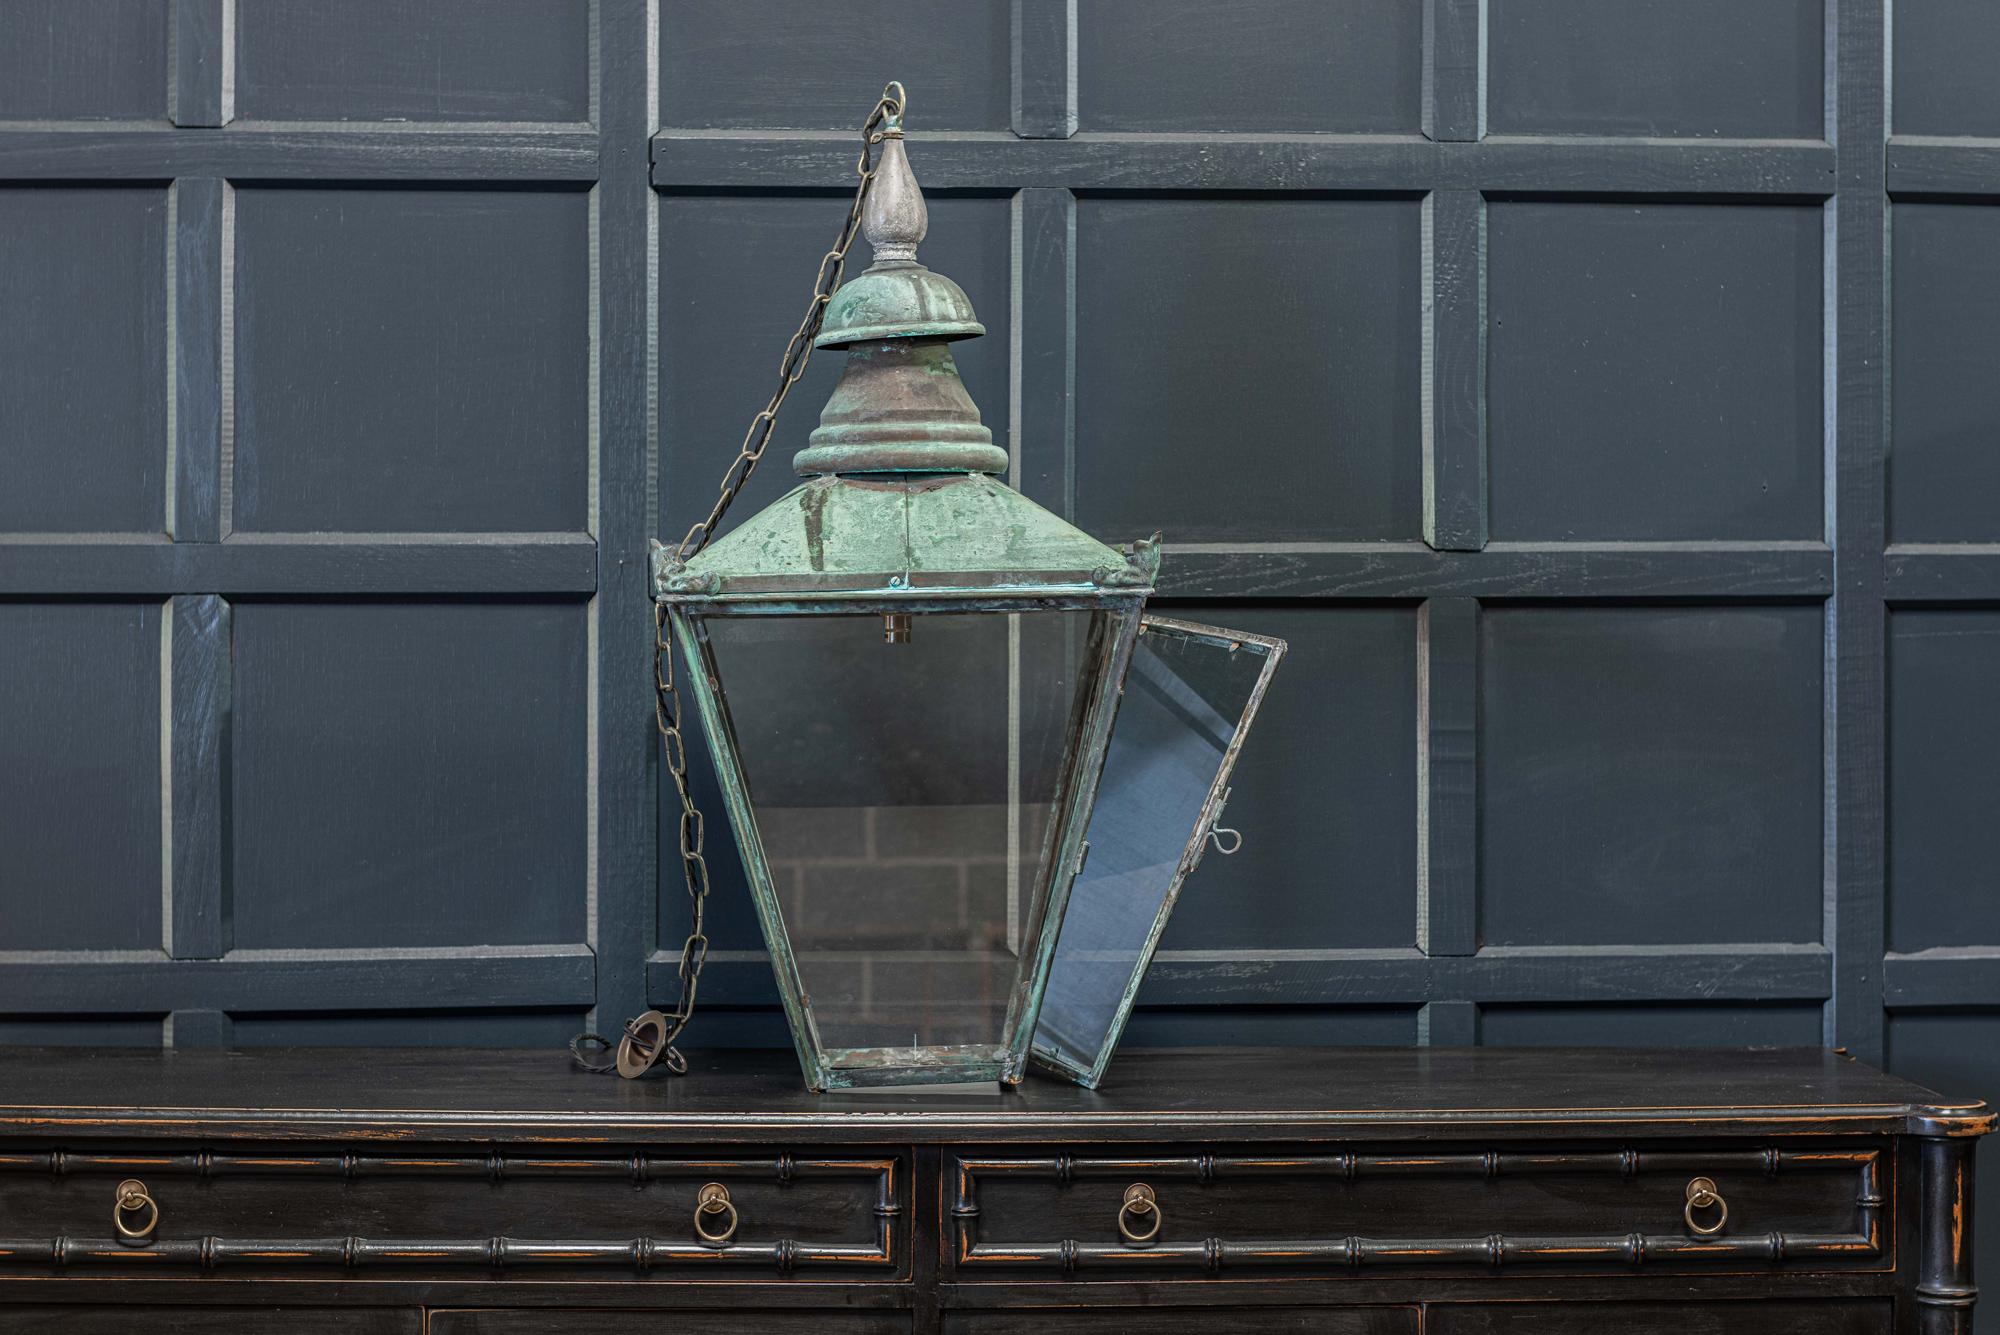 19th century English large Verdigris glazed lantern
circa 1870.

With hinged door, comes with 1m of silk flex, 1m of heavy gauge antique brass chain and bronze ceiling hook.

Re-glazed rewired and pat tested - ready to hang.

Measures: H 90 x